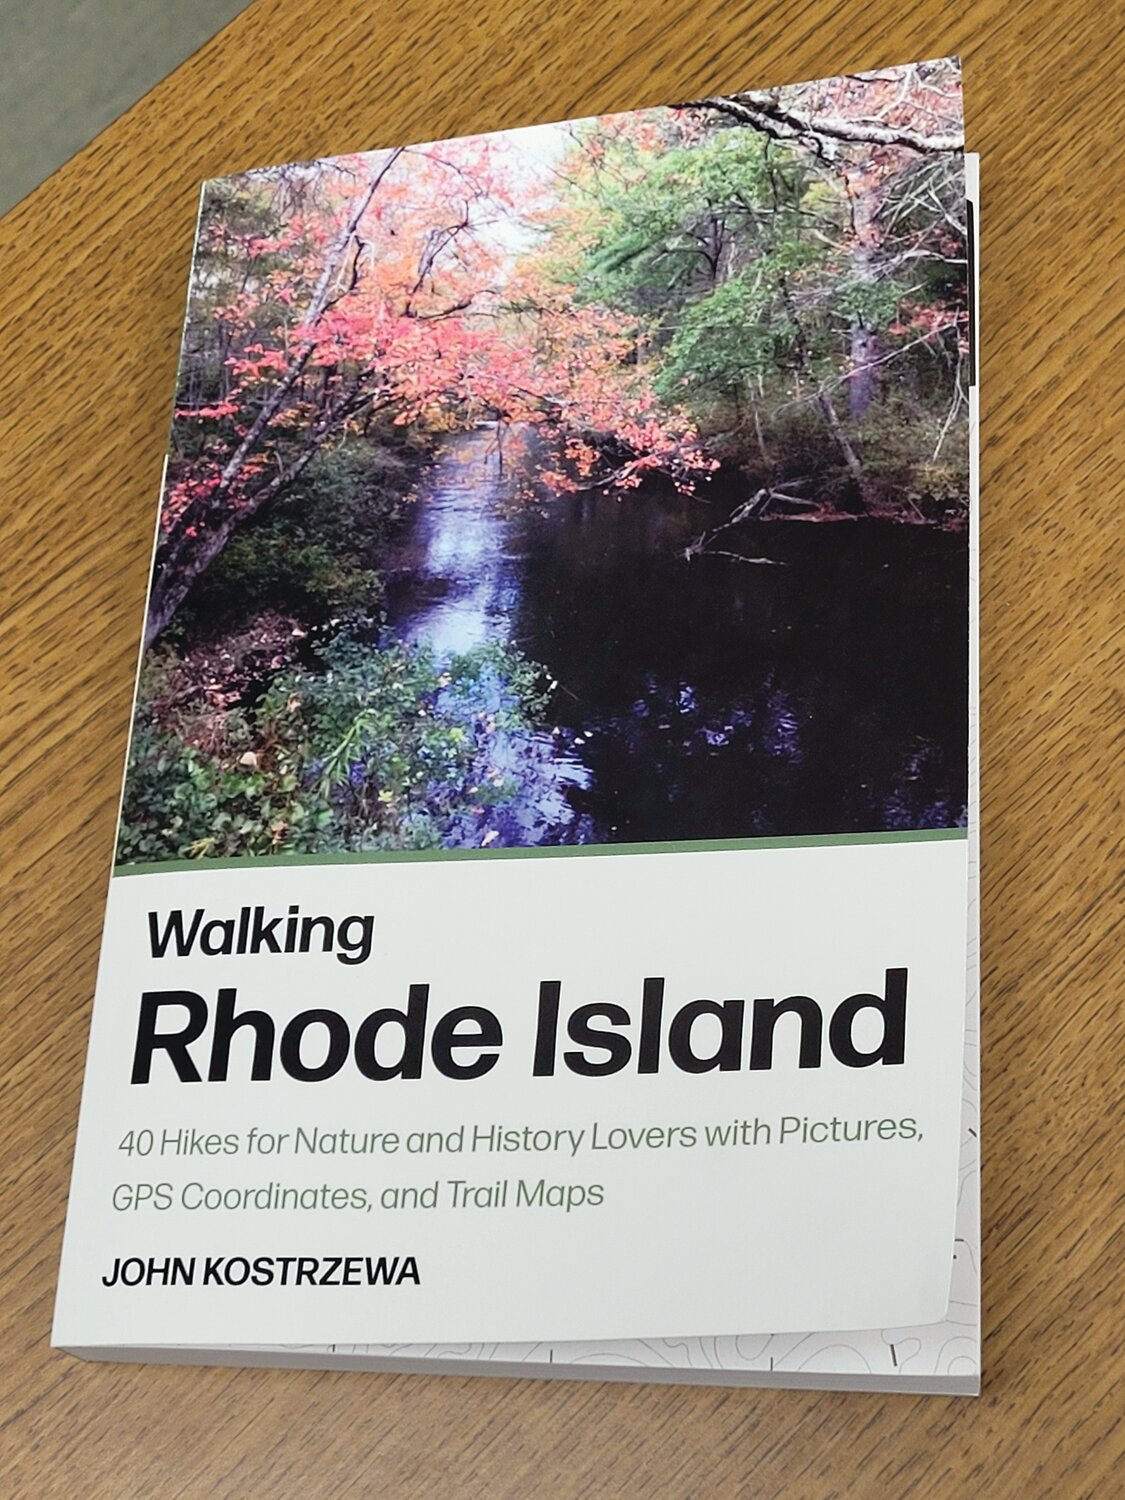 BUY THE BOOK: John Kostrzewa’s book, “Walking Rhode Island: 40 Hikes for Nature and History Lovers with Pictures, GPS Coordinates, and Trail Maps,” can be purchased on Amazon or at the Beacon Communications office, 1944 Warwick Ave., Warwick.